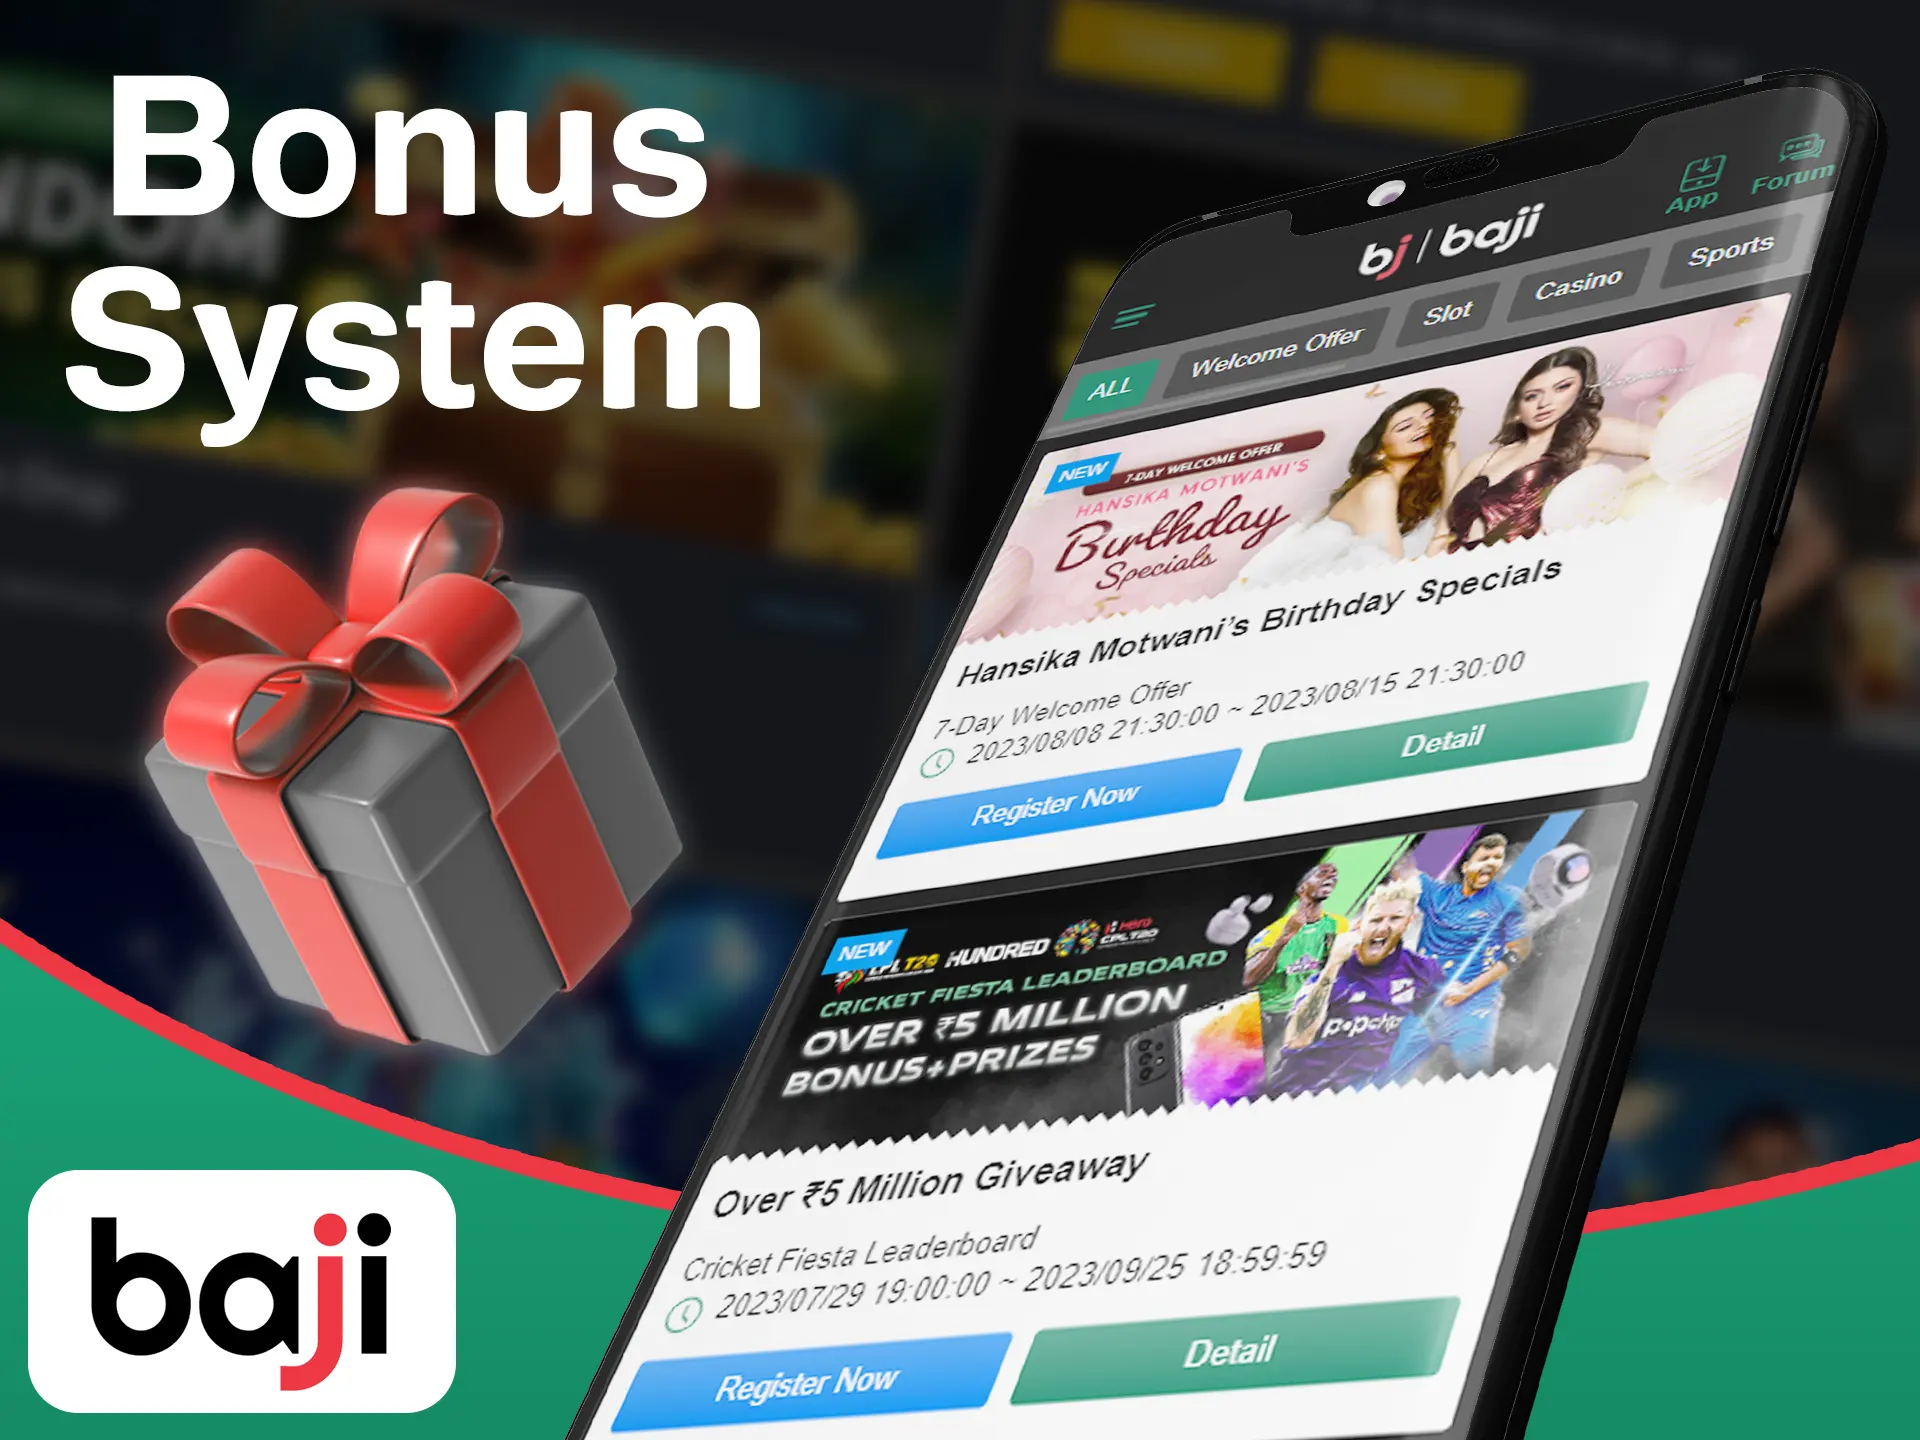 Learn more about the special Baji bonus system.